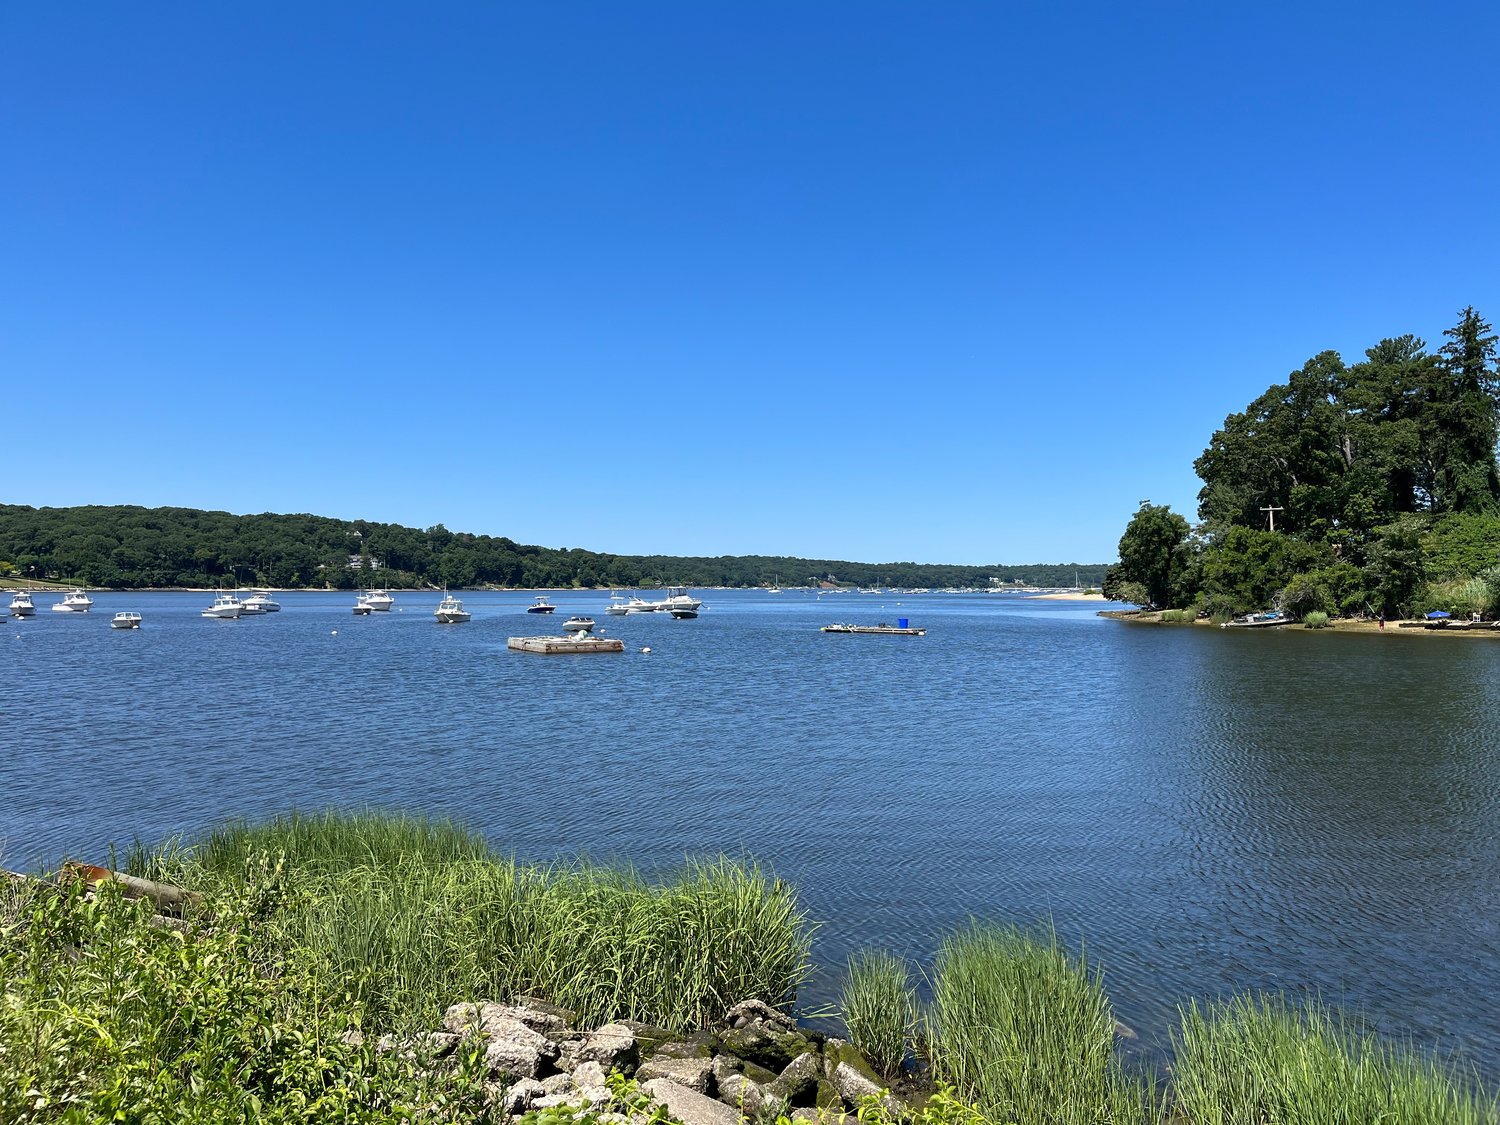 Local waterways, like Cold Spring Harbor, can be susceptible to outbreaks of harmful algal blooms — more commonly known as ‘red tides’ — during the summer months.